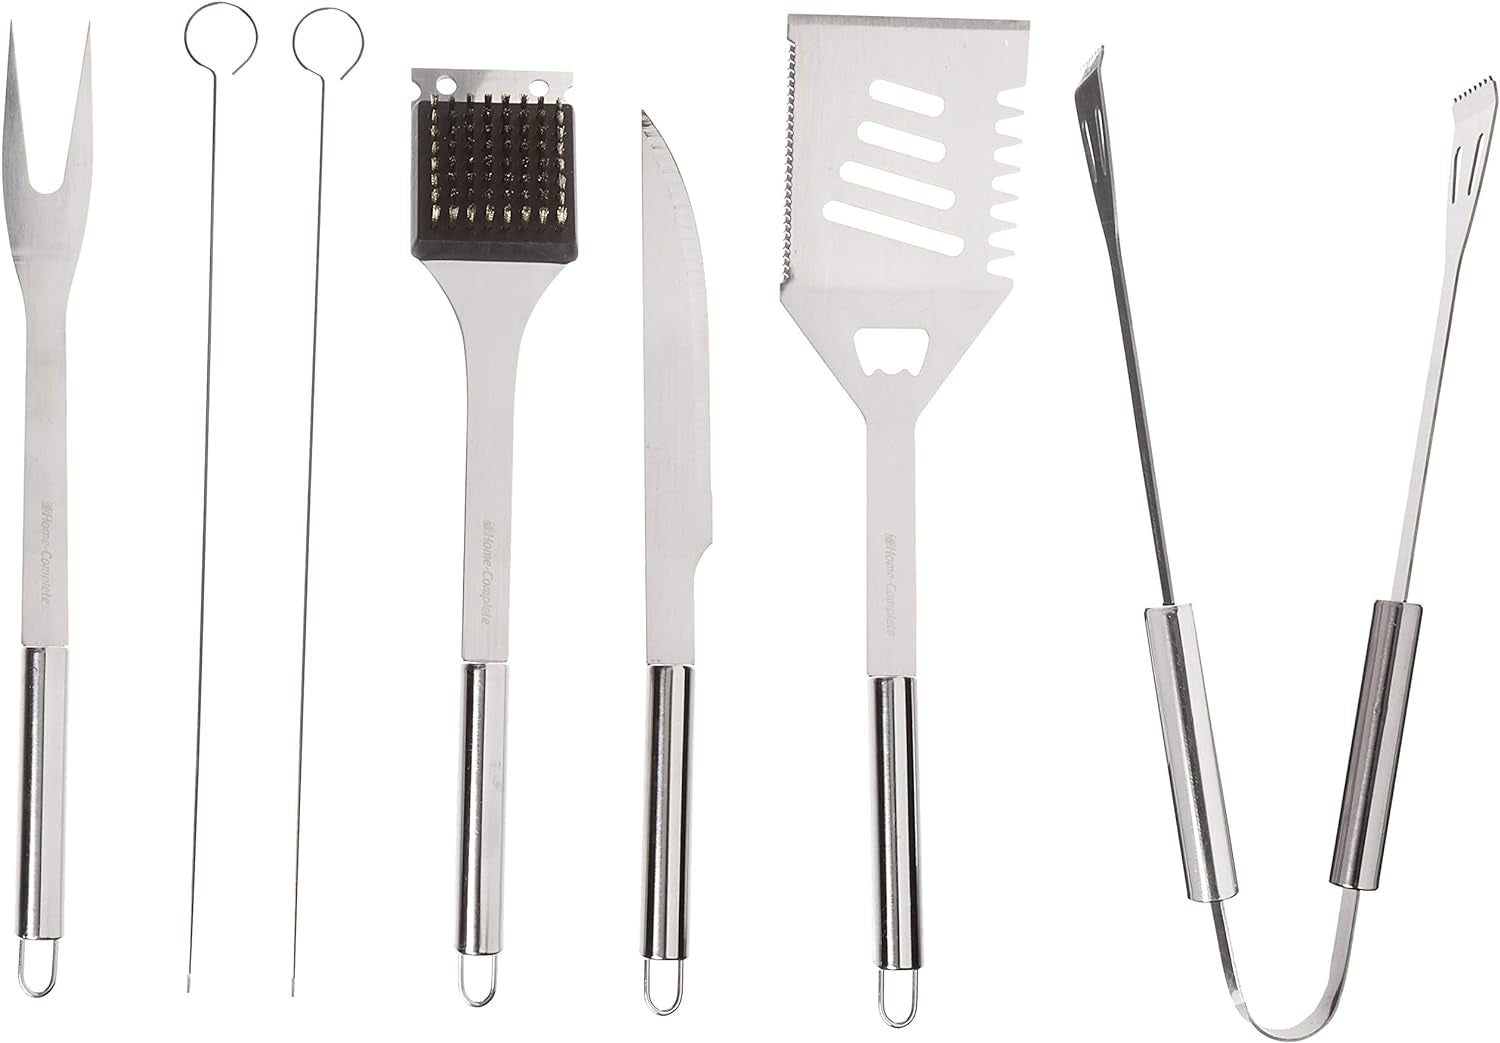 BBQ Grill Tool Set- Stainless Steel Barbecue Grilling Accessories with 7 Utensils and Carrying Case, Includes Spatula, Tongs, Knife,Silver